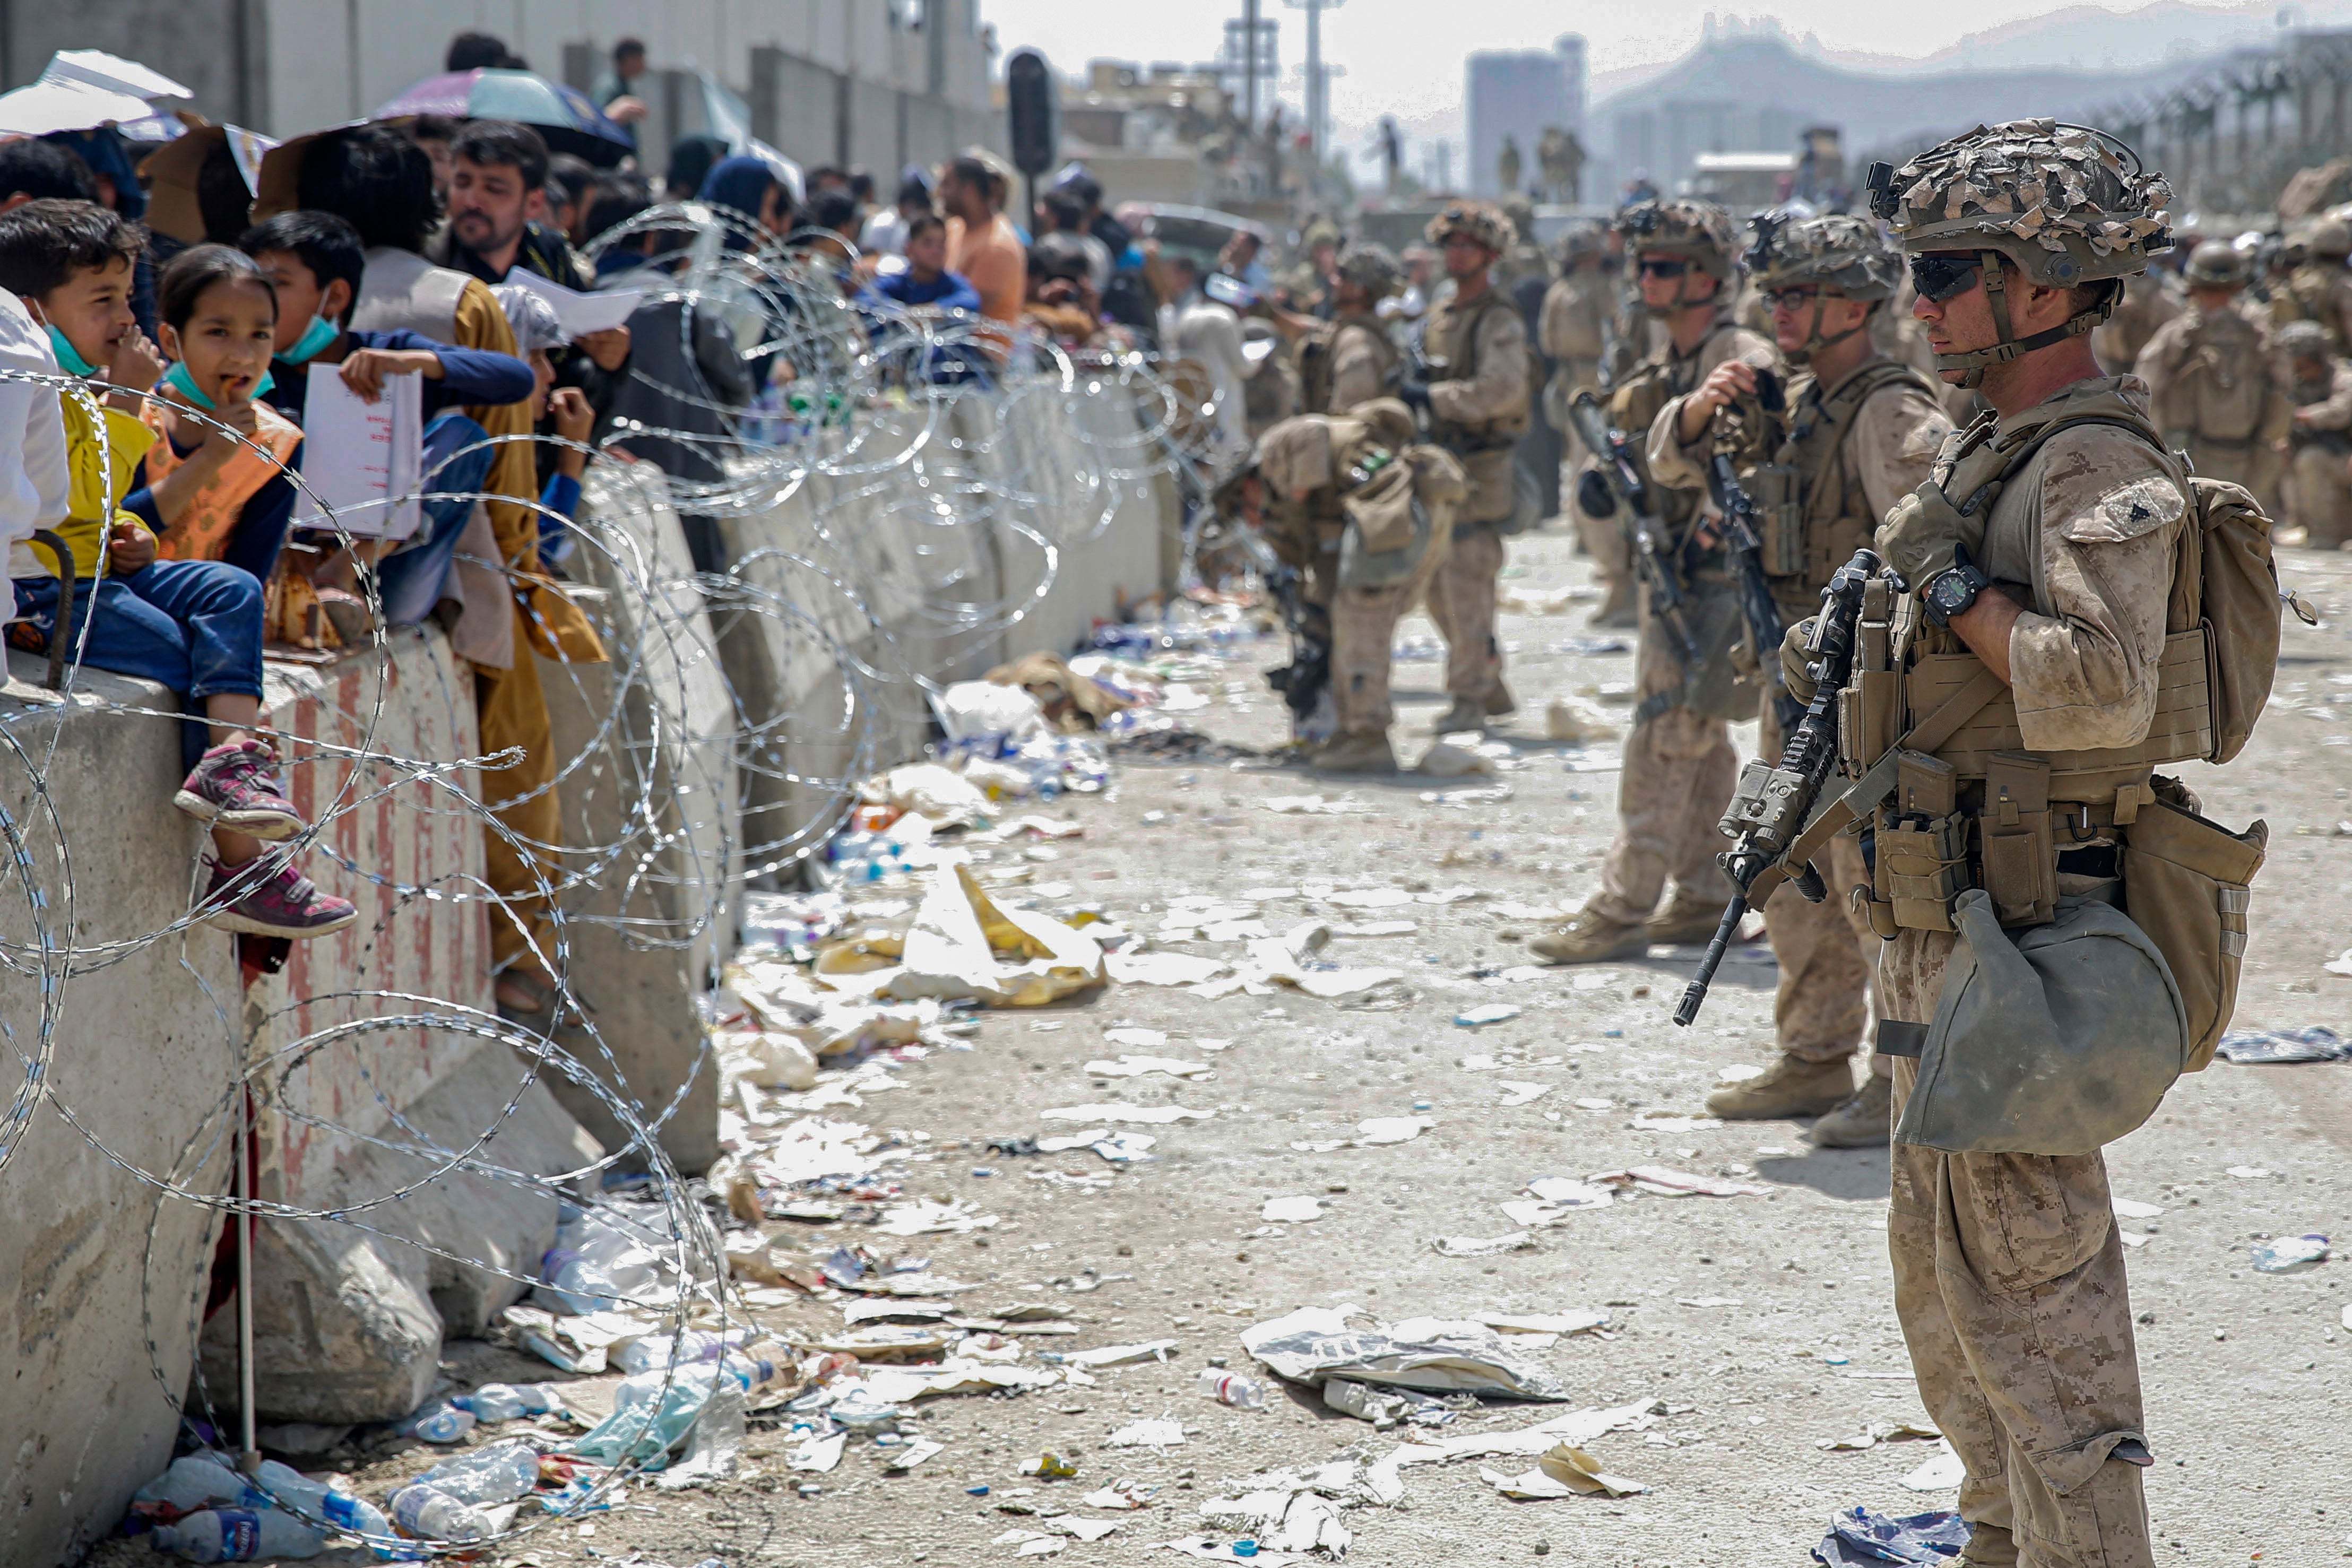 US marines during the Kabul evacuation in Afghanistan in August 2021